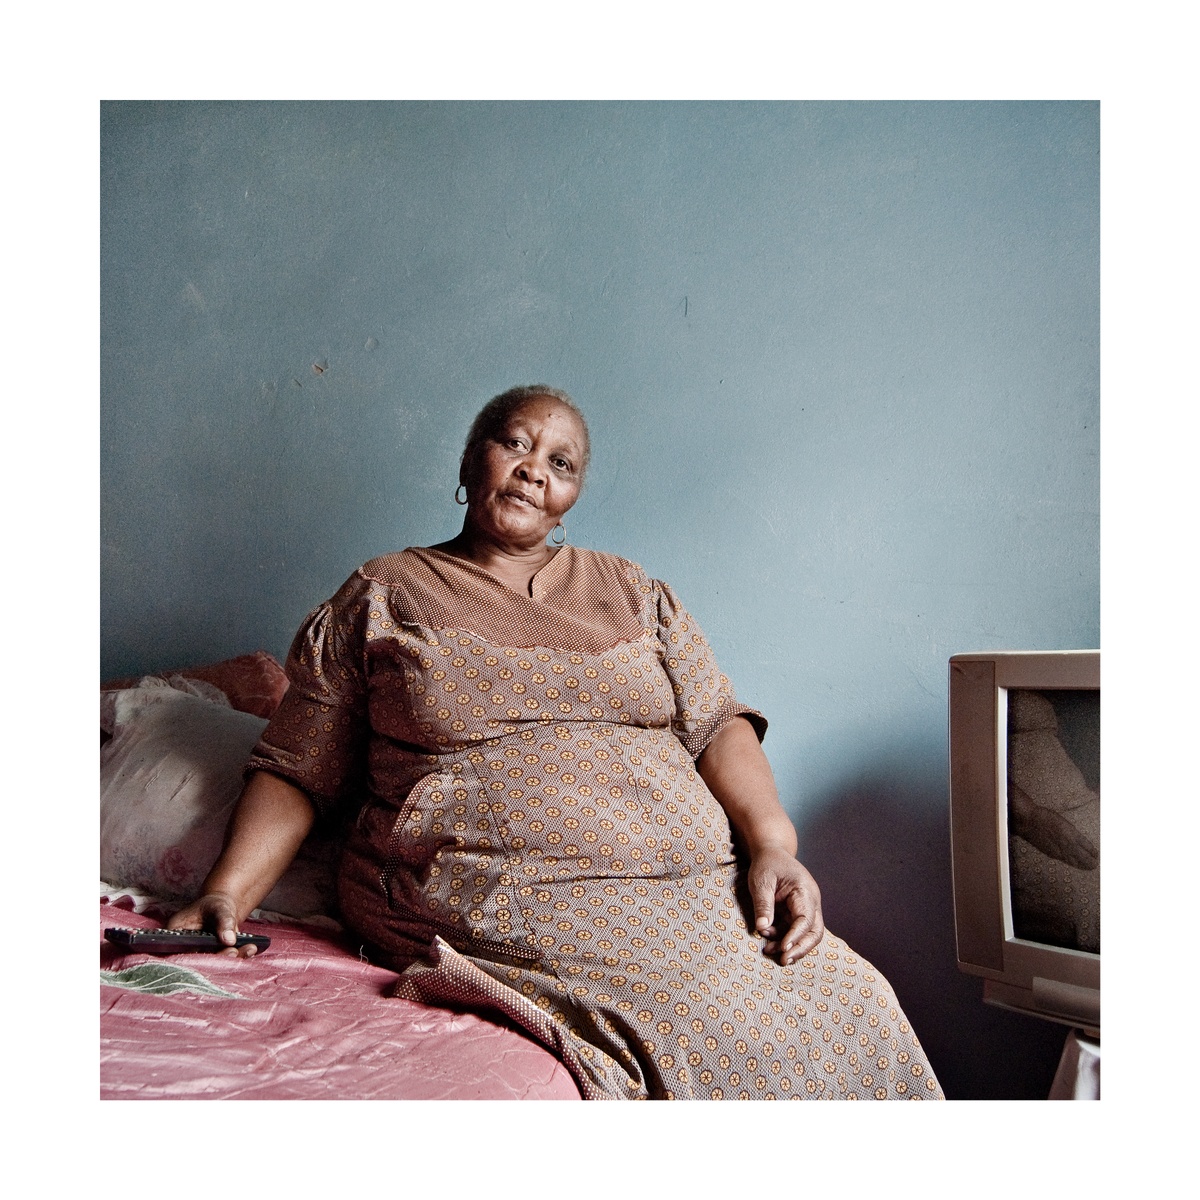 Photograph from Jabulani Dhlamini’s residency on A4’s top floor shows an individual seated on the edge of a bed on the left, with a television screen to the right.
